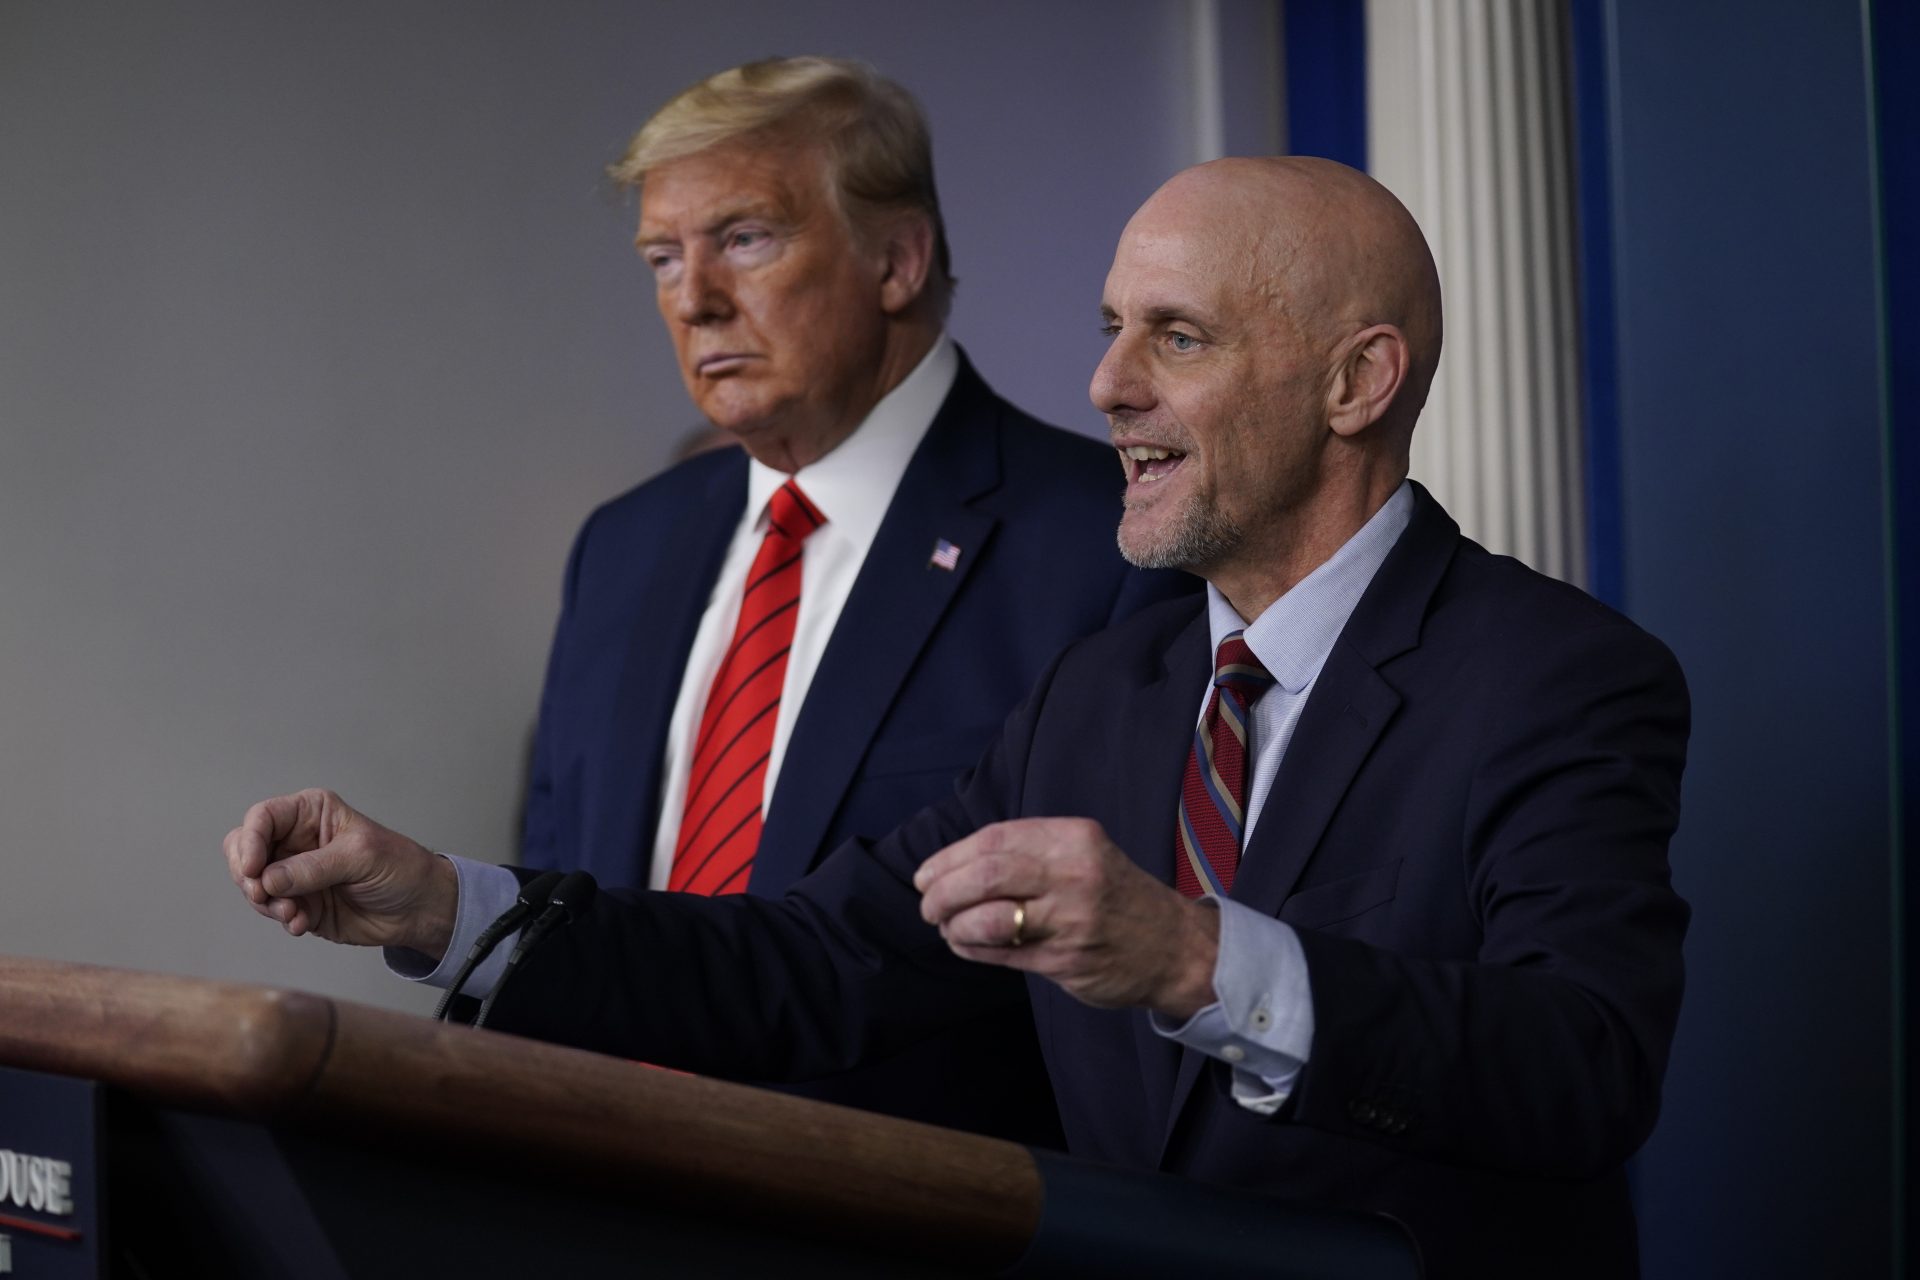 President Donald Trump, left, listens as Food and Drug Administration Commissioner Dr. Stephen Hahn speaks during press briefing with the coronavirus task force, at the White House, Thursday, March 19, 2020, in Washington.